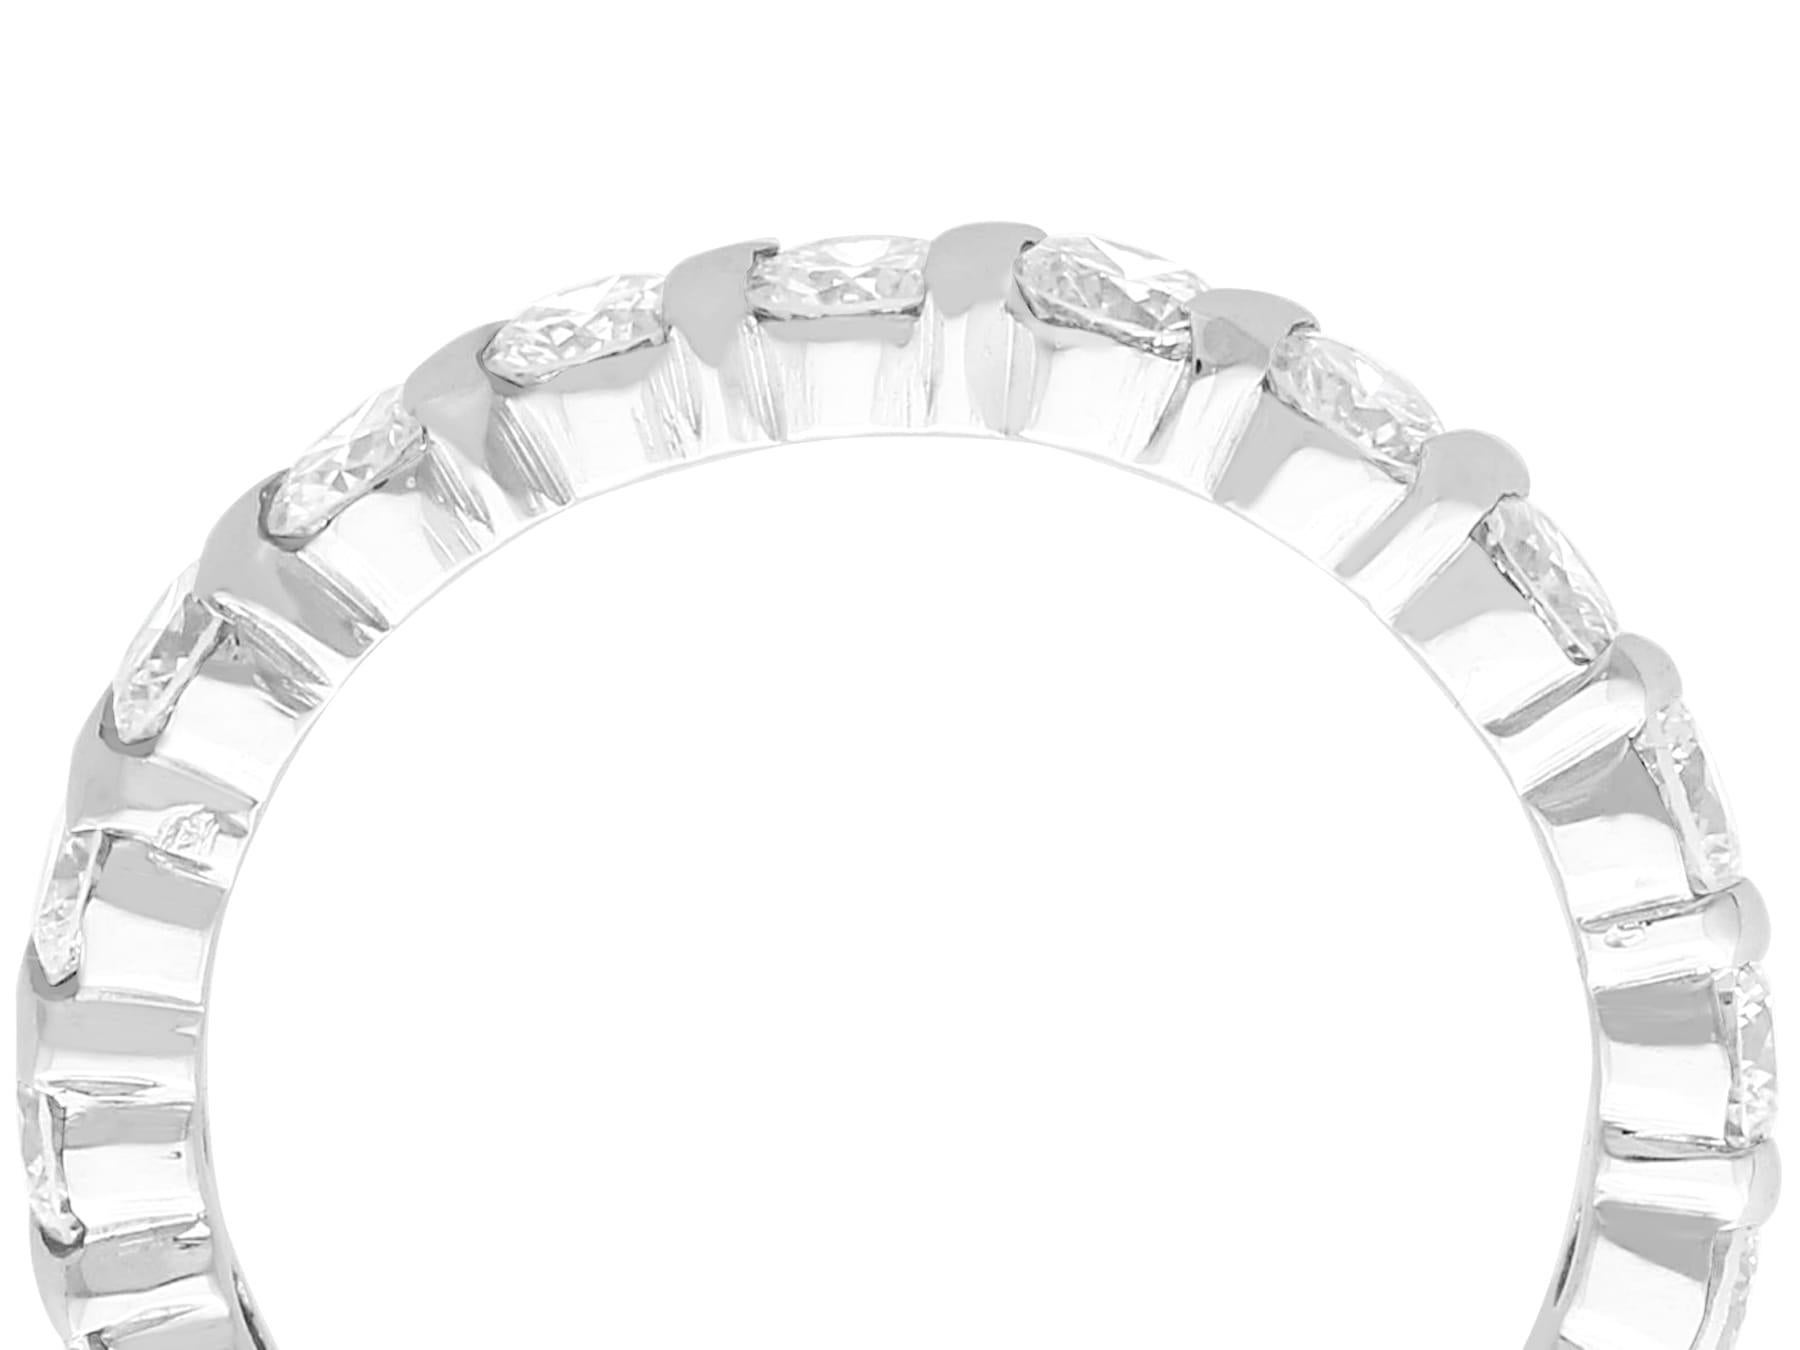 A stunning vintage 1980s 1.88 carat diamond and 18 karat white gold full eternity ring; part of our diverse diamond jewelry and estate jewelry collections.

This stunning, fine and impressive vintage eternity ring has been crafted in 18k white